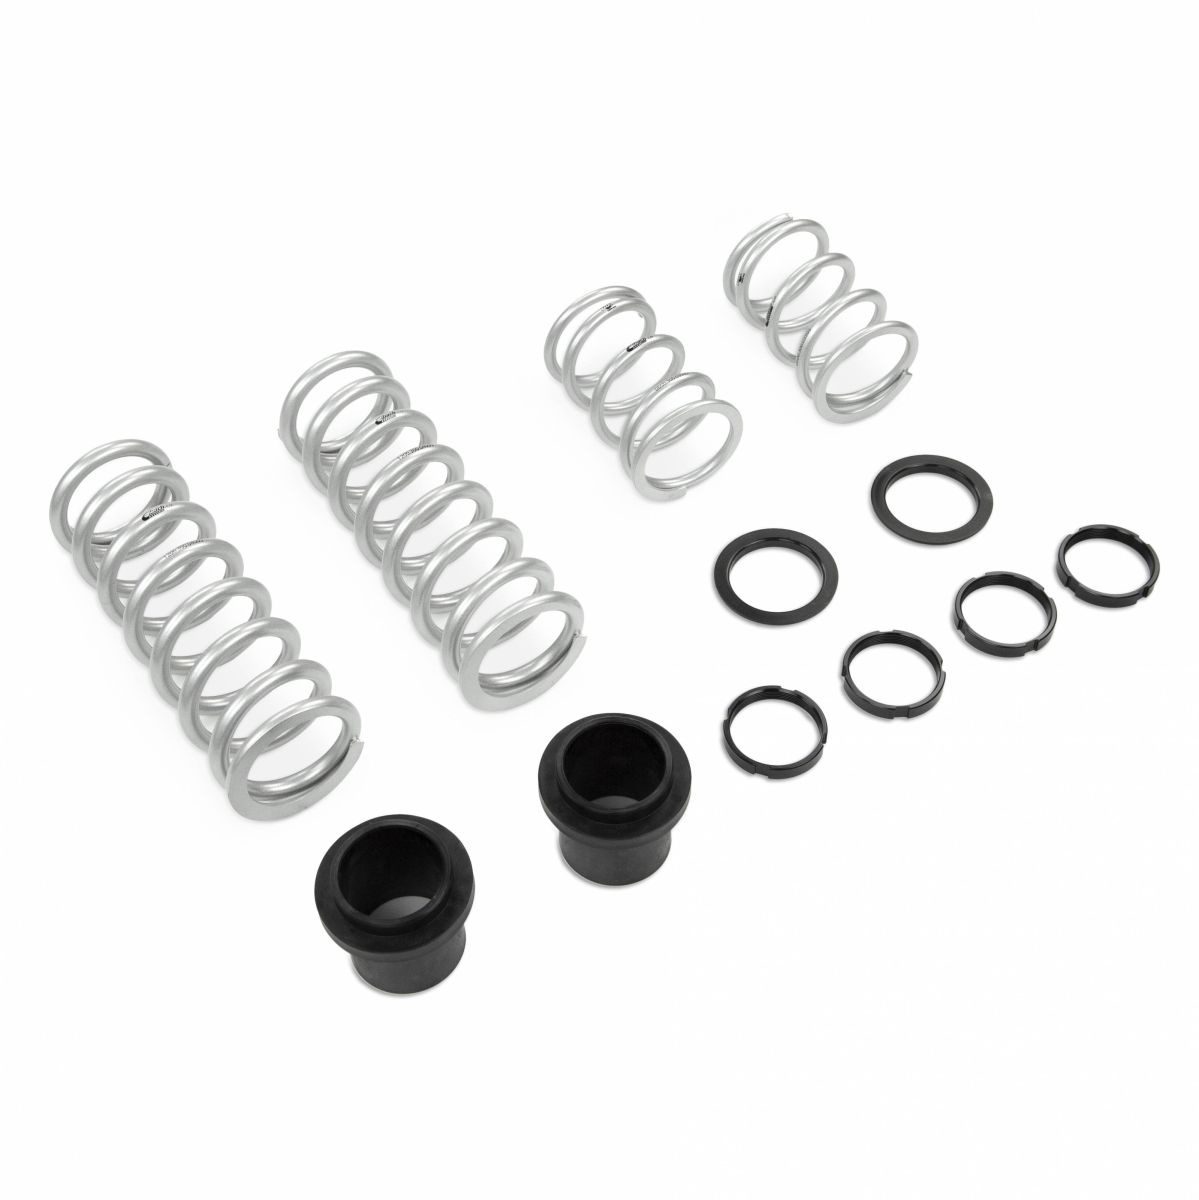 Cognito Motorsports - Cognito Dual Rate Front Spring Kit For Fox 2.5 Inch Shocks On 16-19 Polaris XP 4